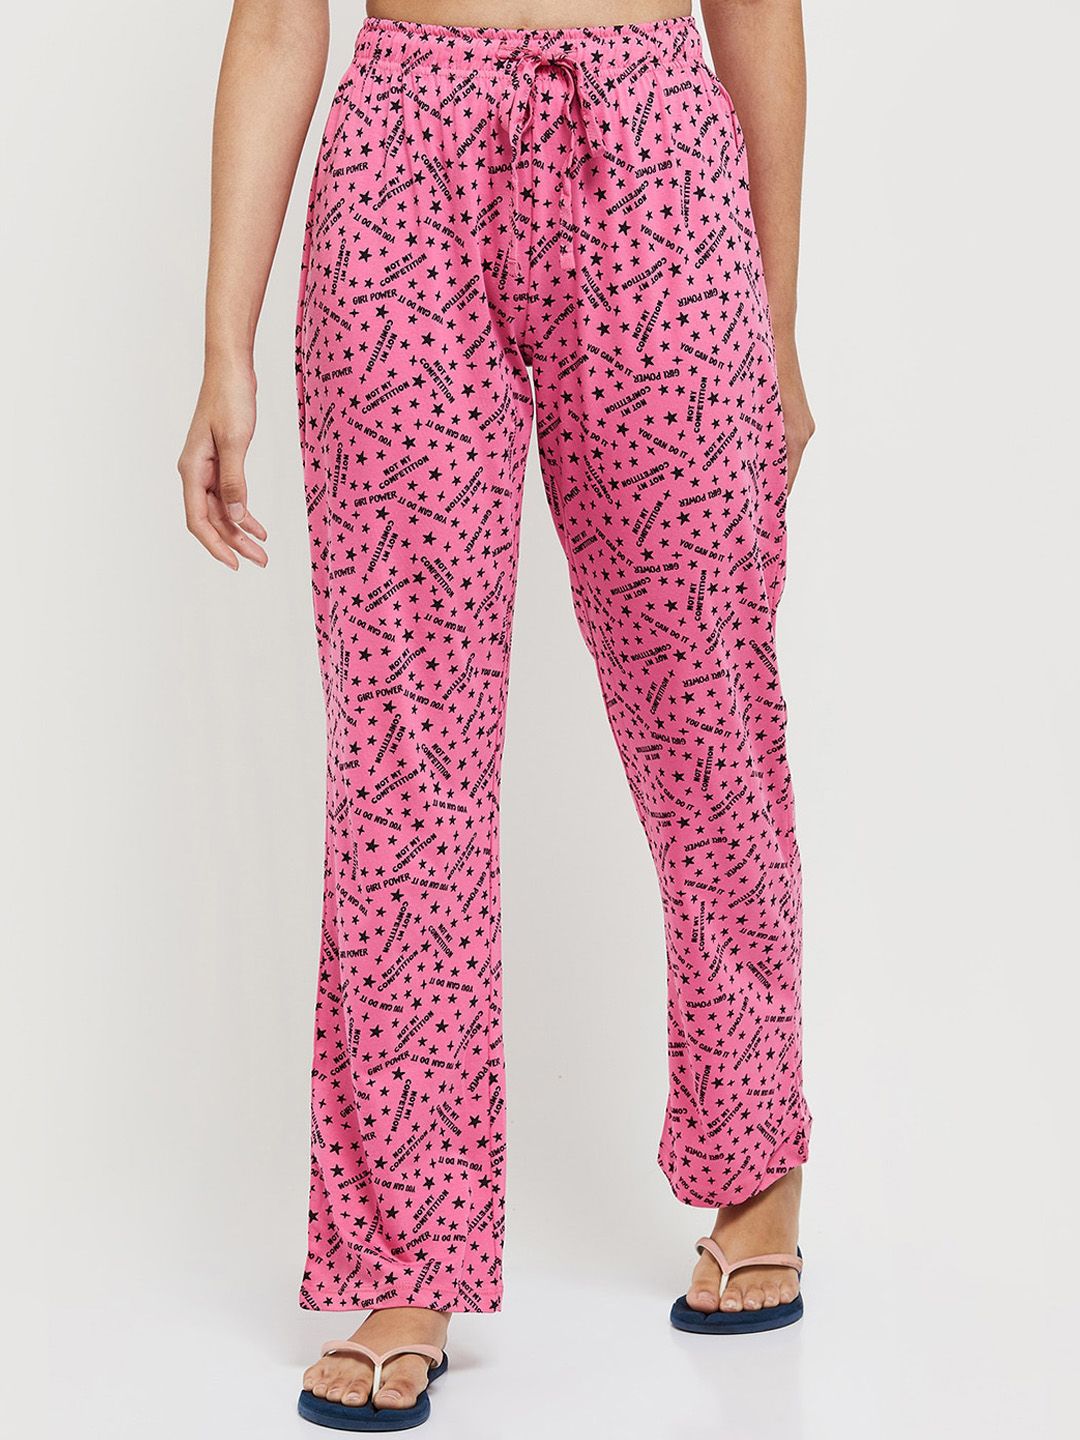 max Women Pink & Black Printed Pure Cotton Lounge Pants Price in India